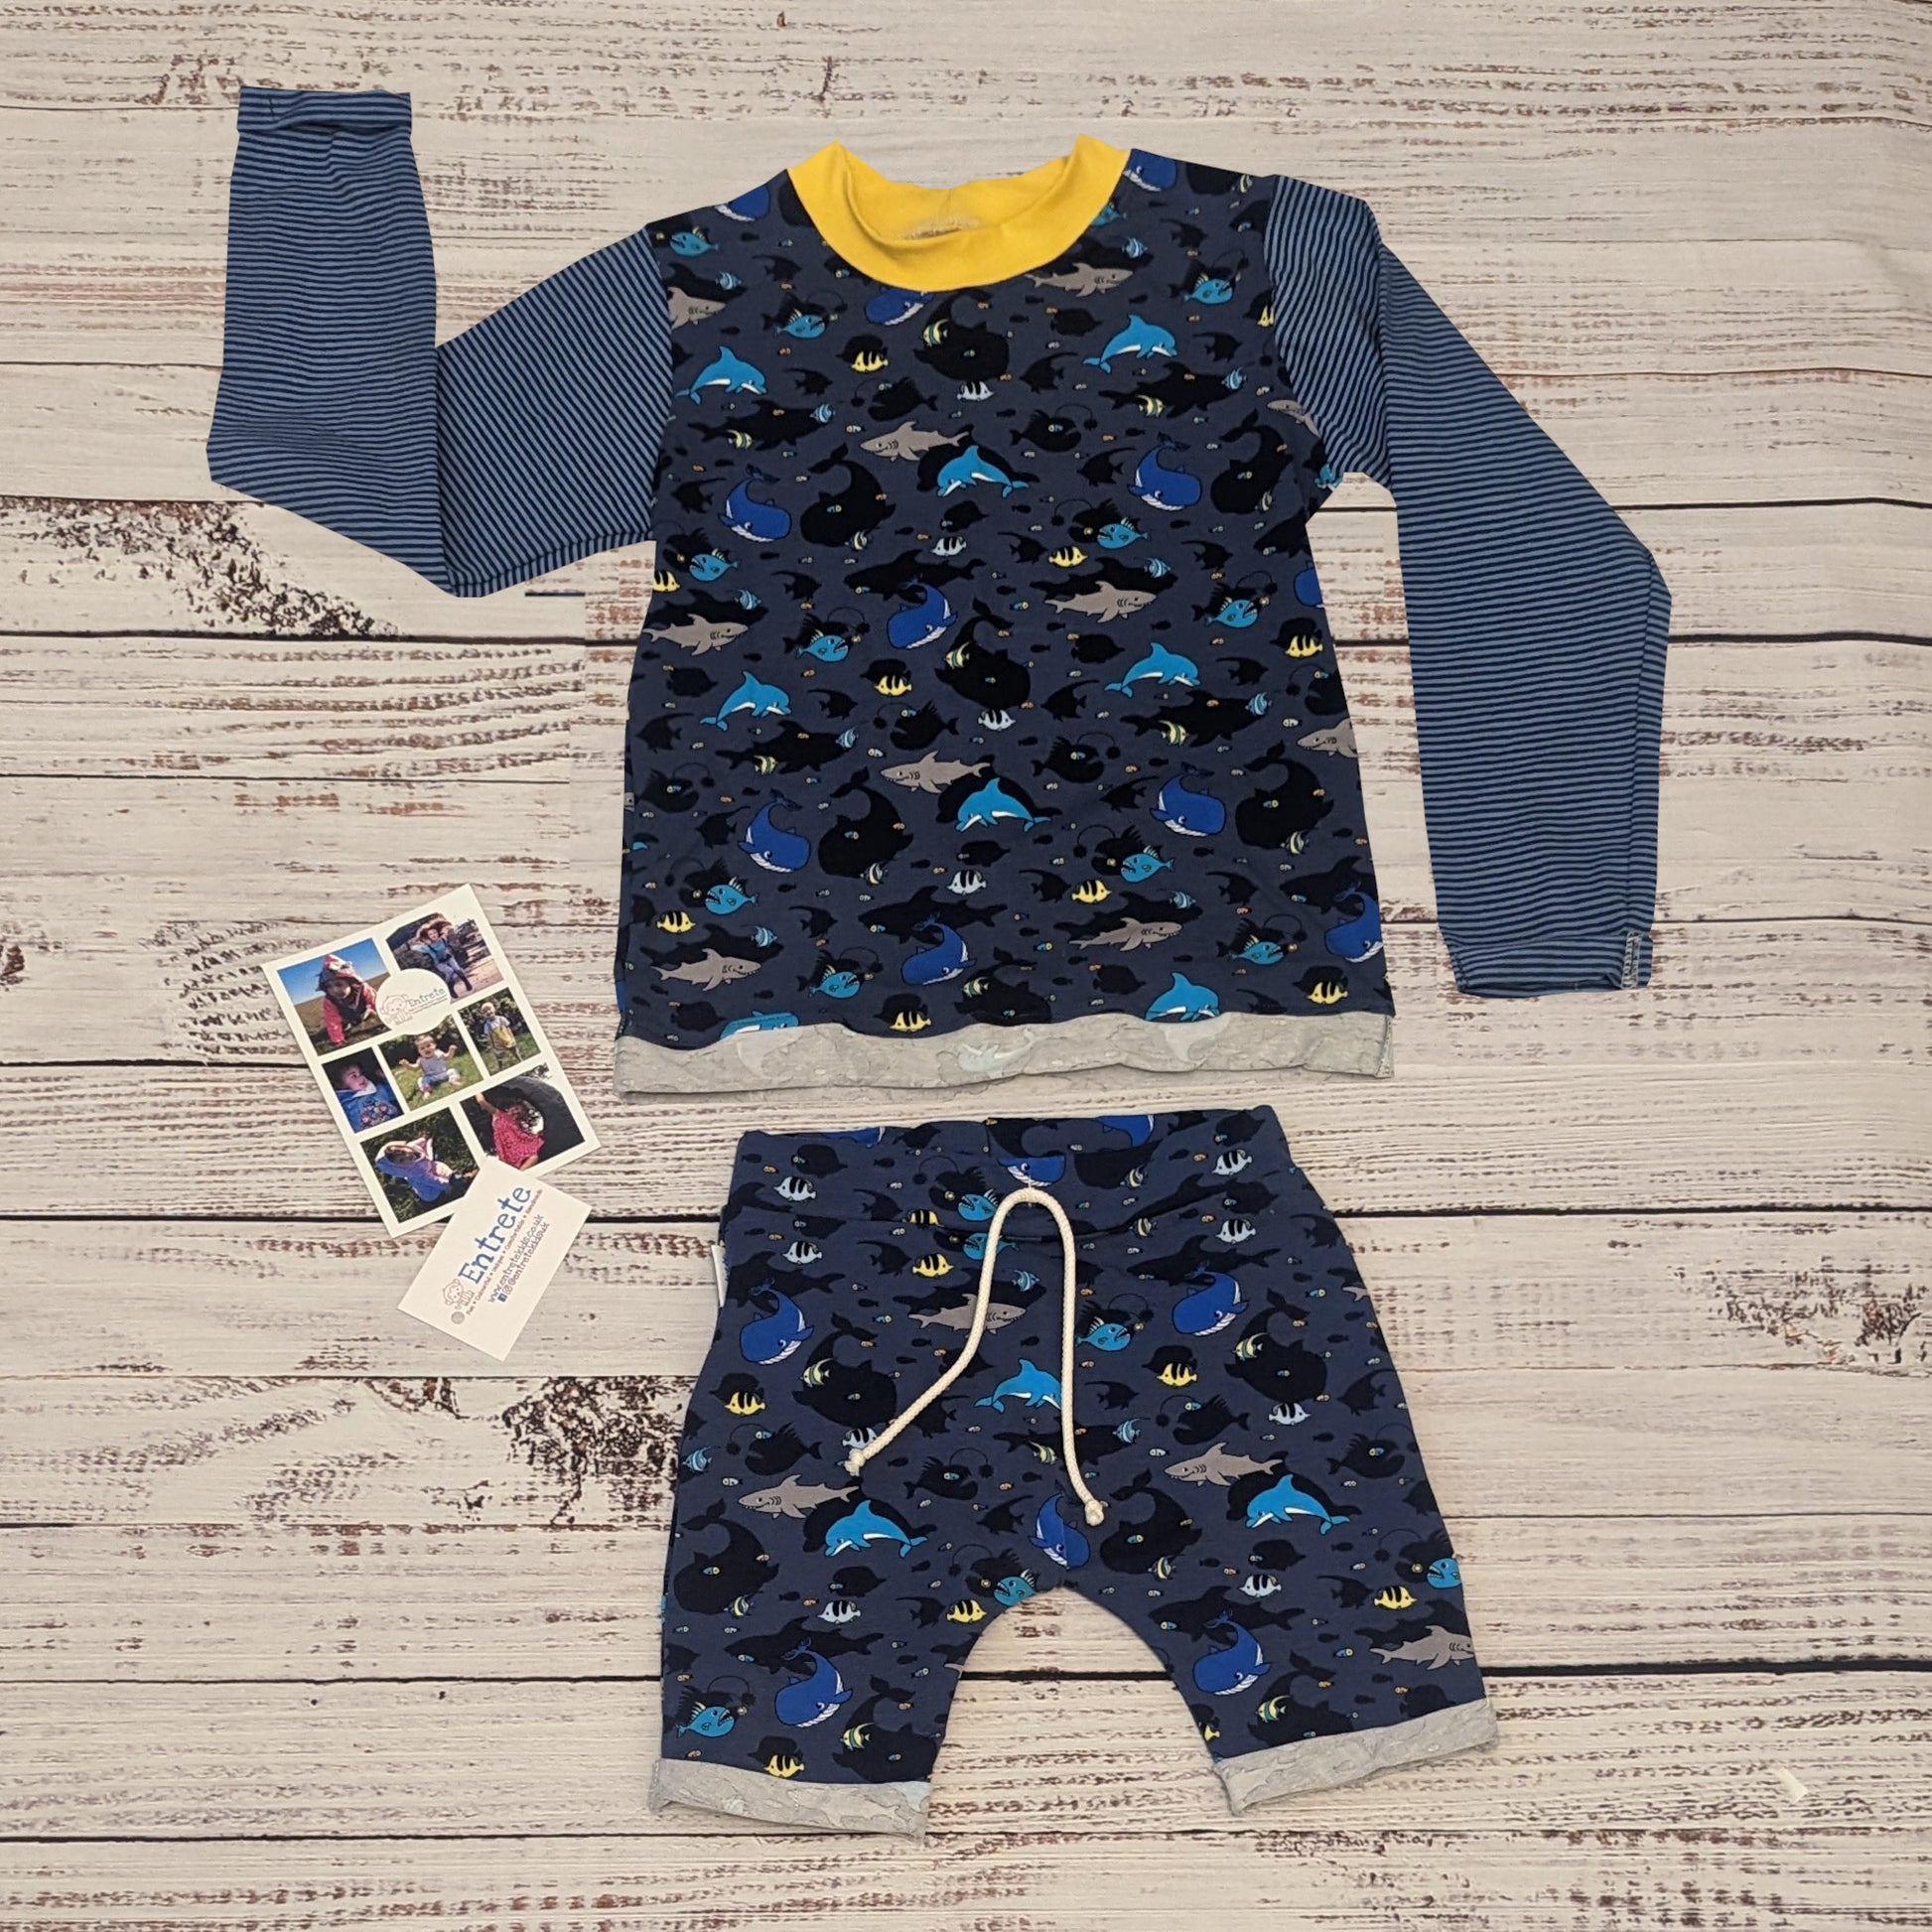 Kids sea creatures harem shorts. Handmade using navy sea life shadows cotton jersey. Shown as an outfit with a matching long sleeve T-shirt.